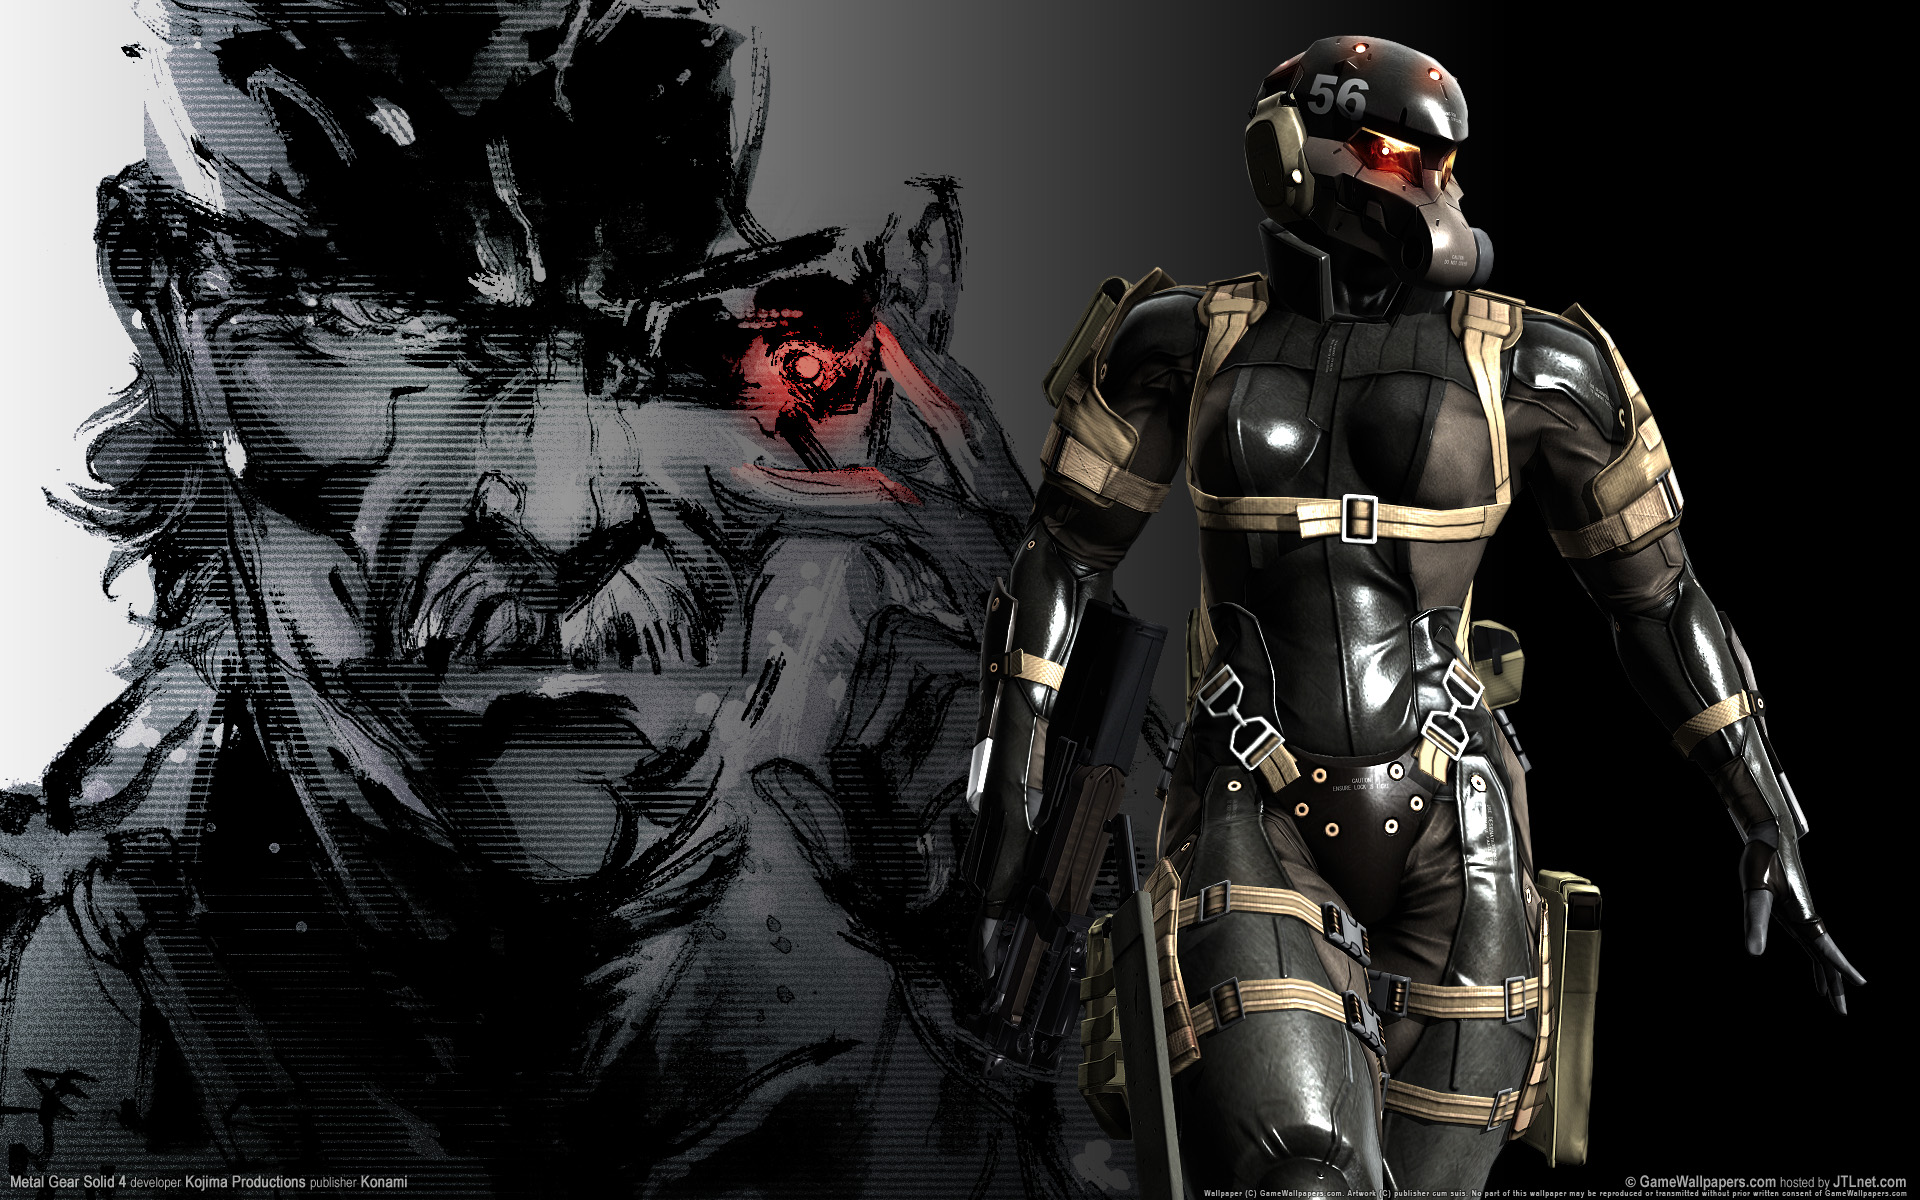 Amazing Metal Gear Pictures & Backgrounds